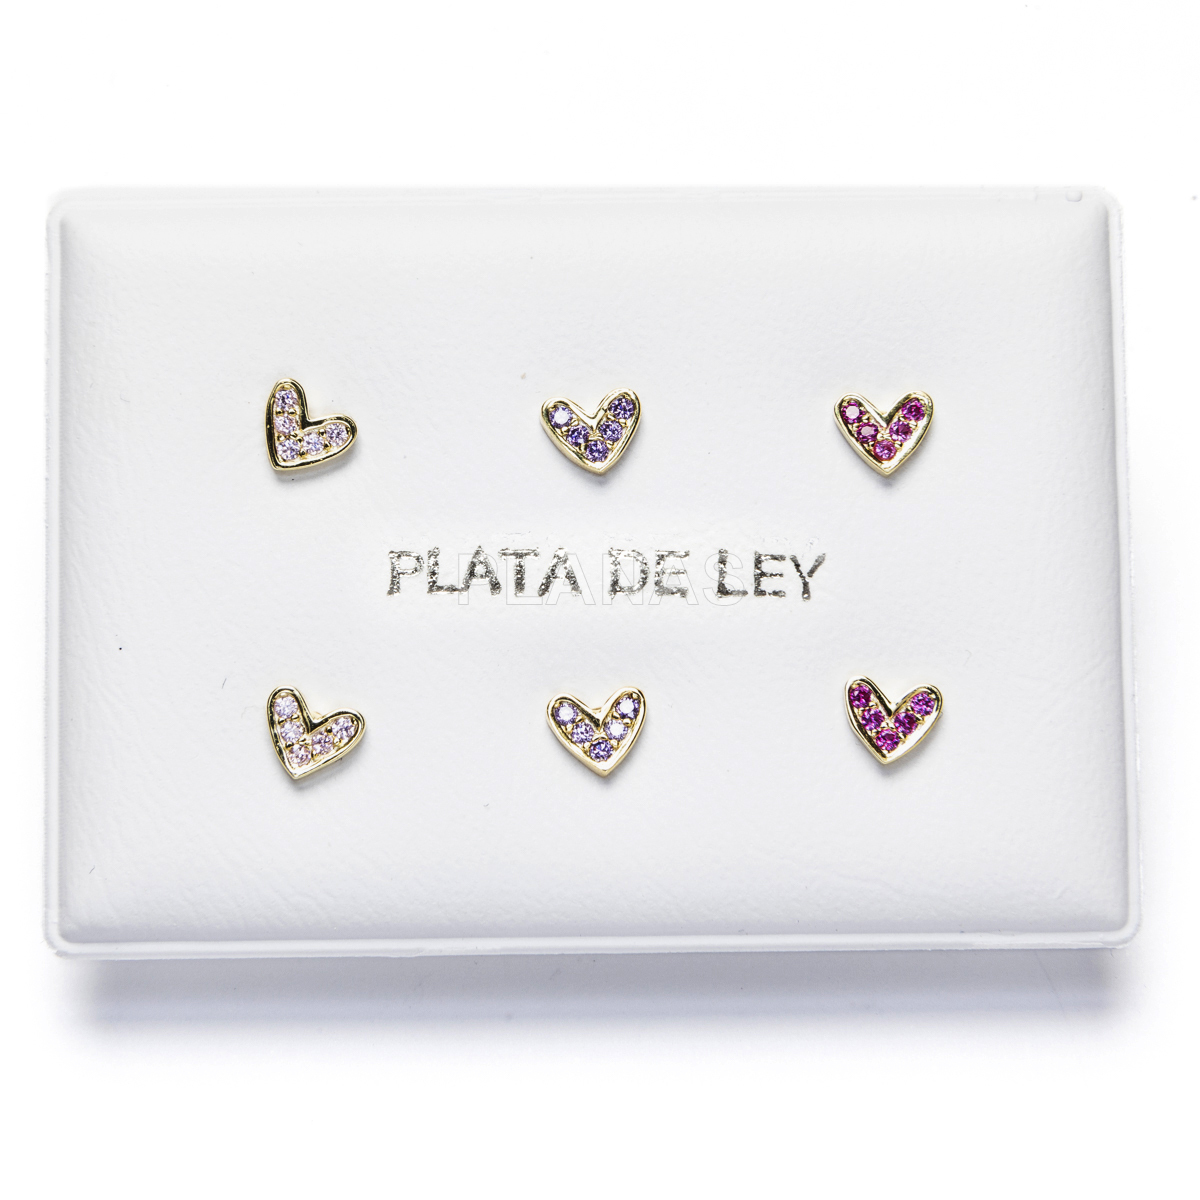 Display of 3pr earrings in sterling silver and gold plated and zirconia. heart.